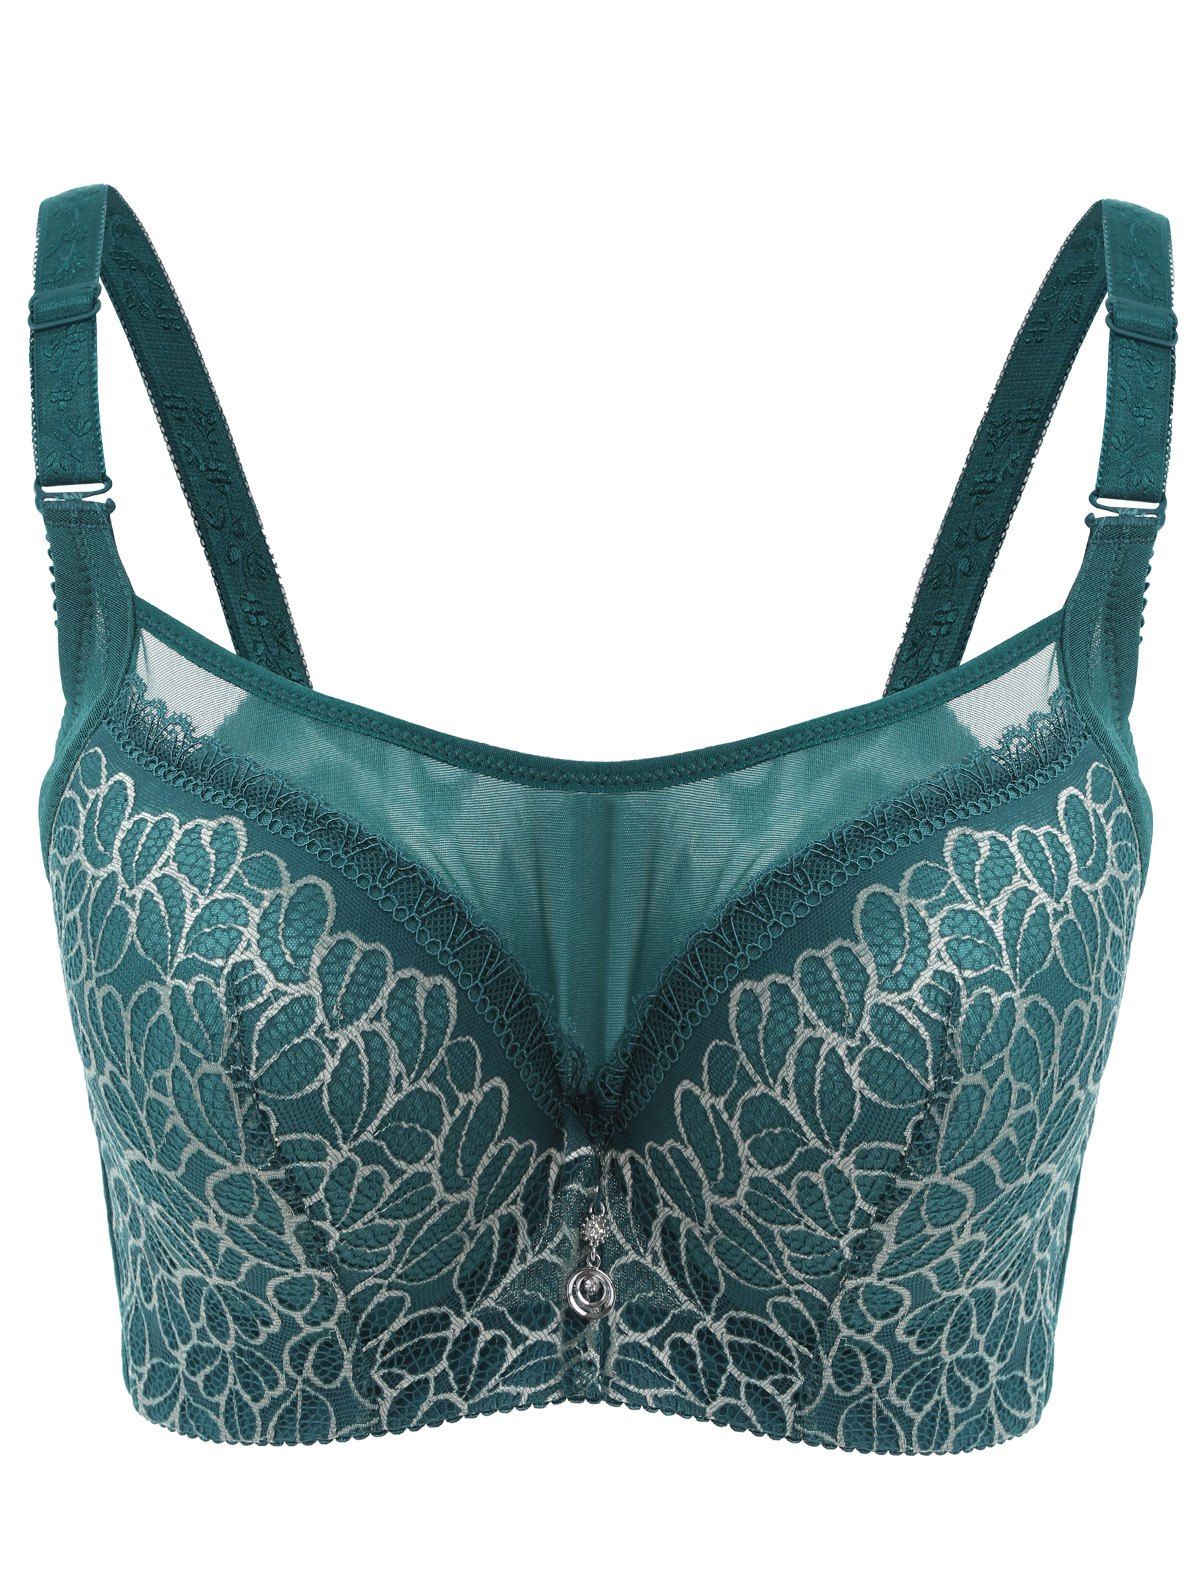 [17% OFF] 2020 Push Up Embroidery Mesh Insert Push Up Bra In GREEN ...